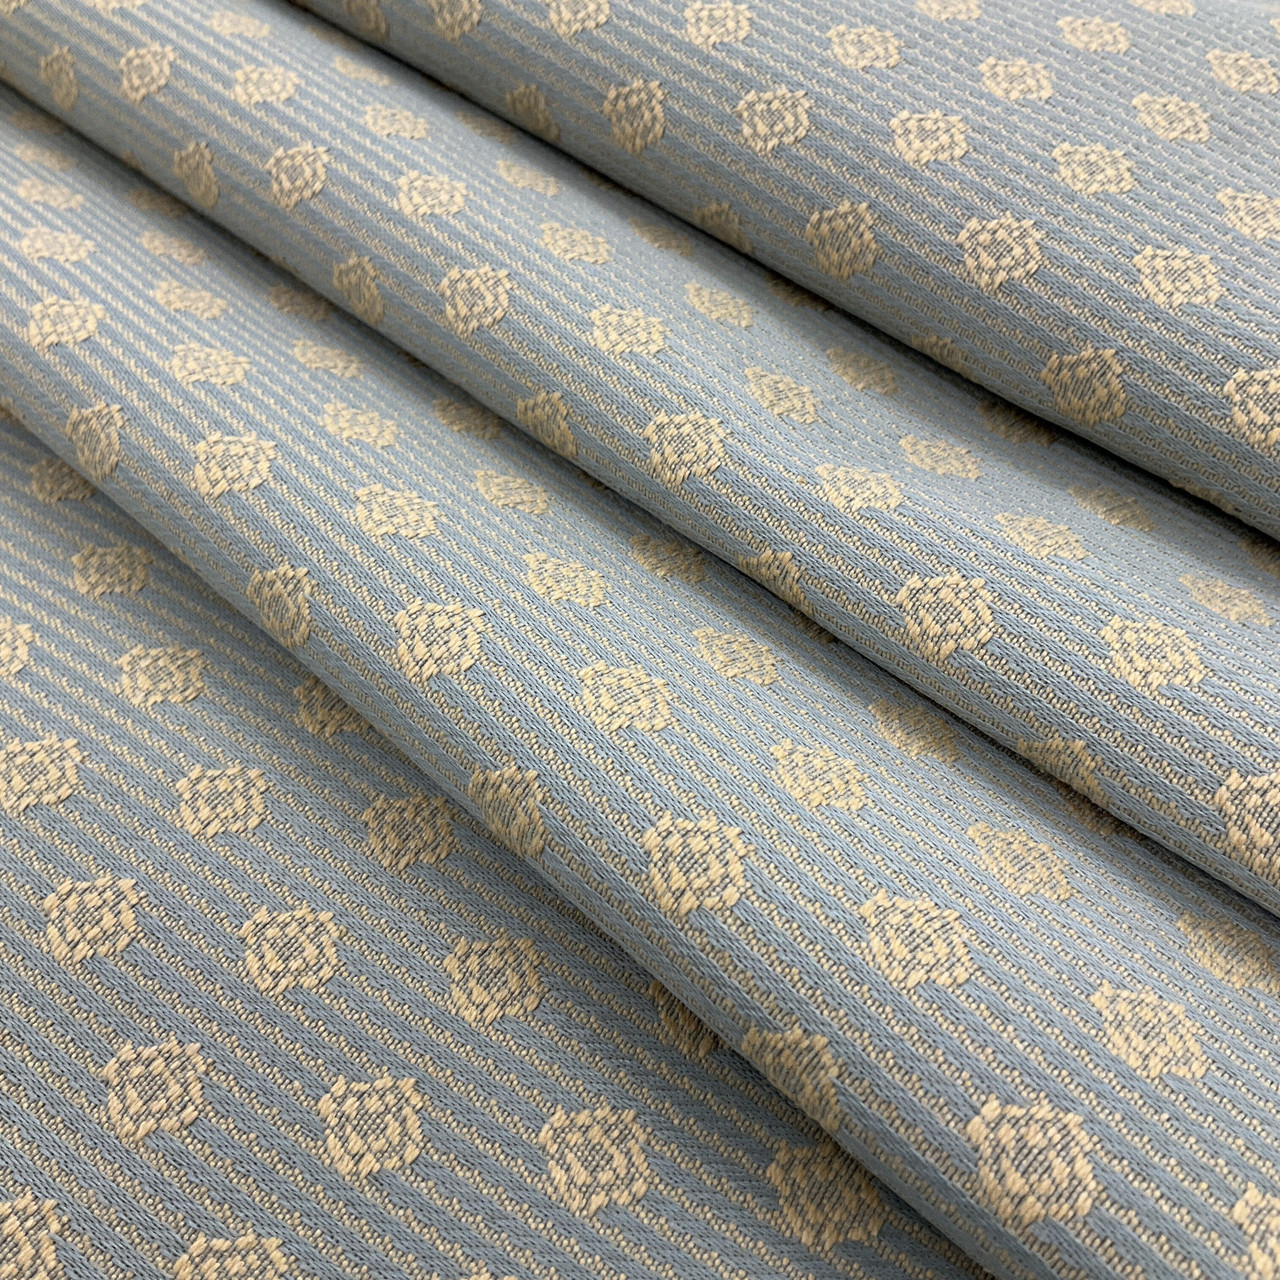 Blue Polyester/cotton Broadcloth Fabric 